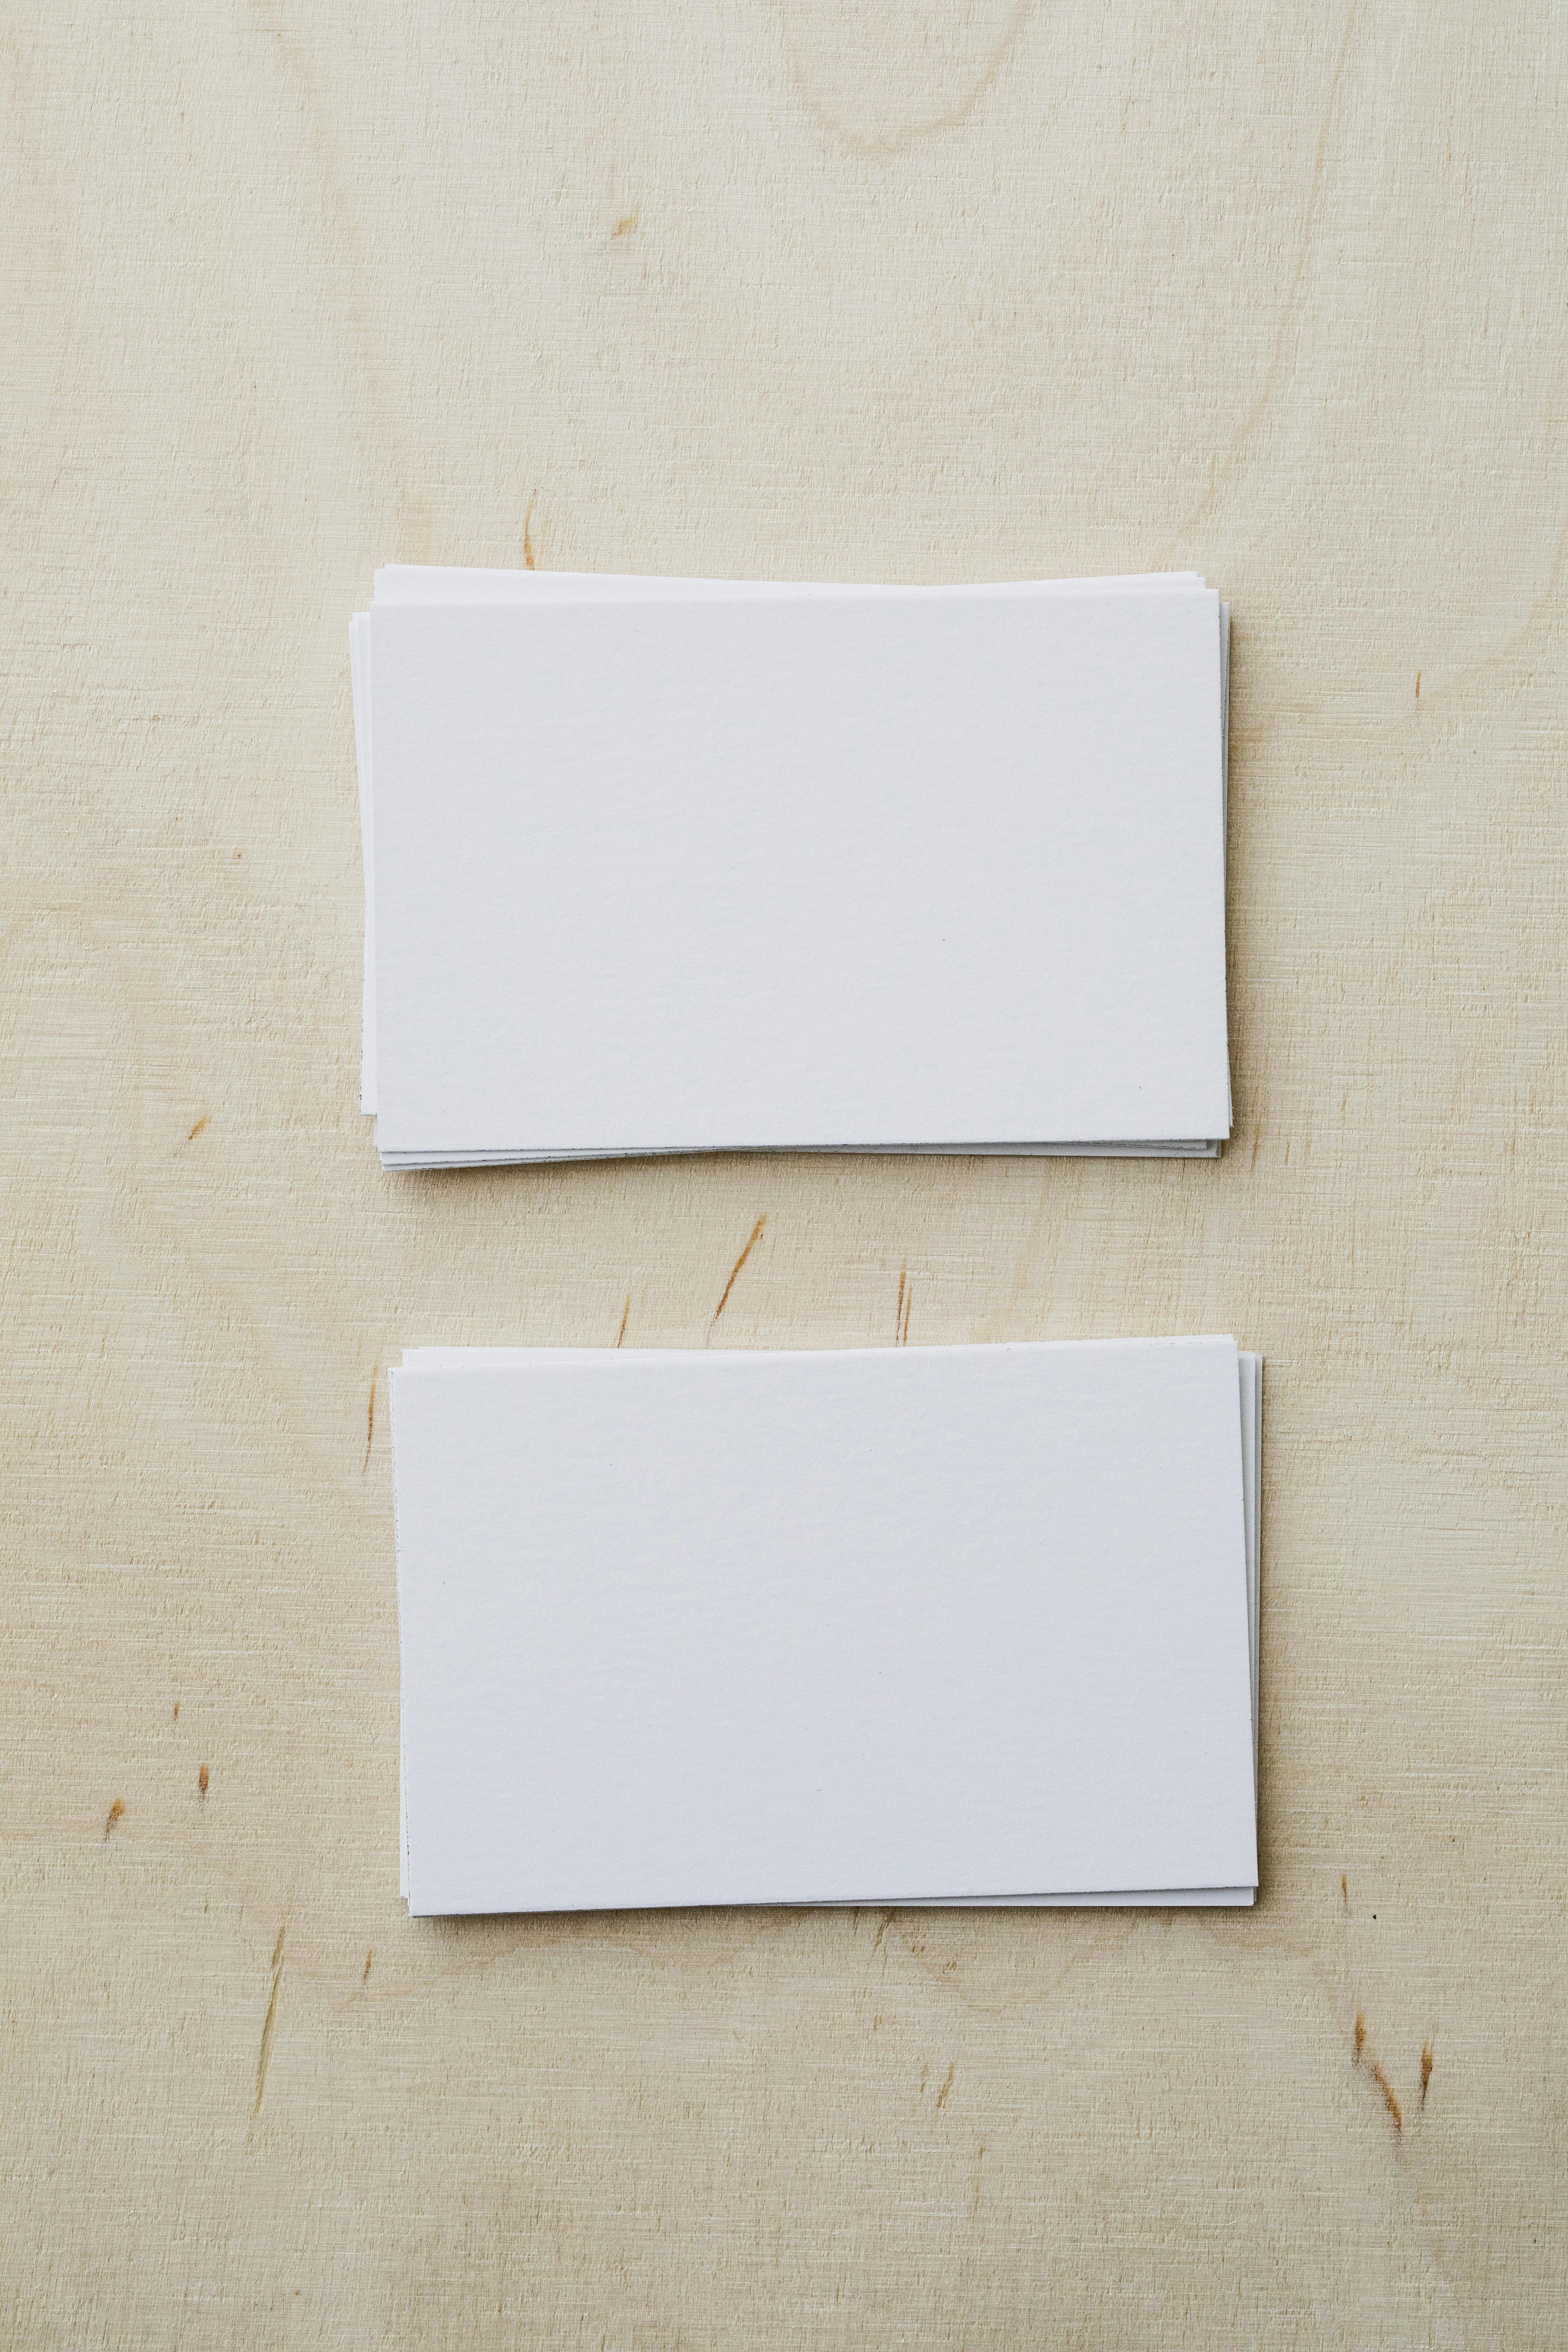 Handmade Envelopes. How To Decorate Envelopes For Greeting Cards